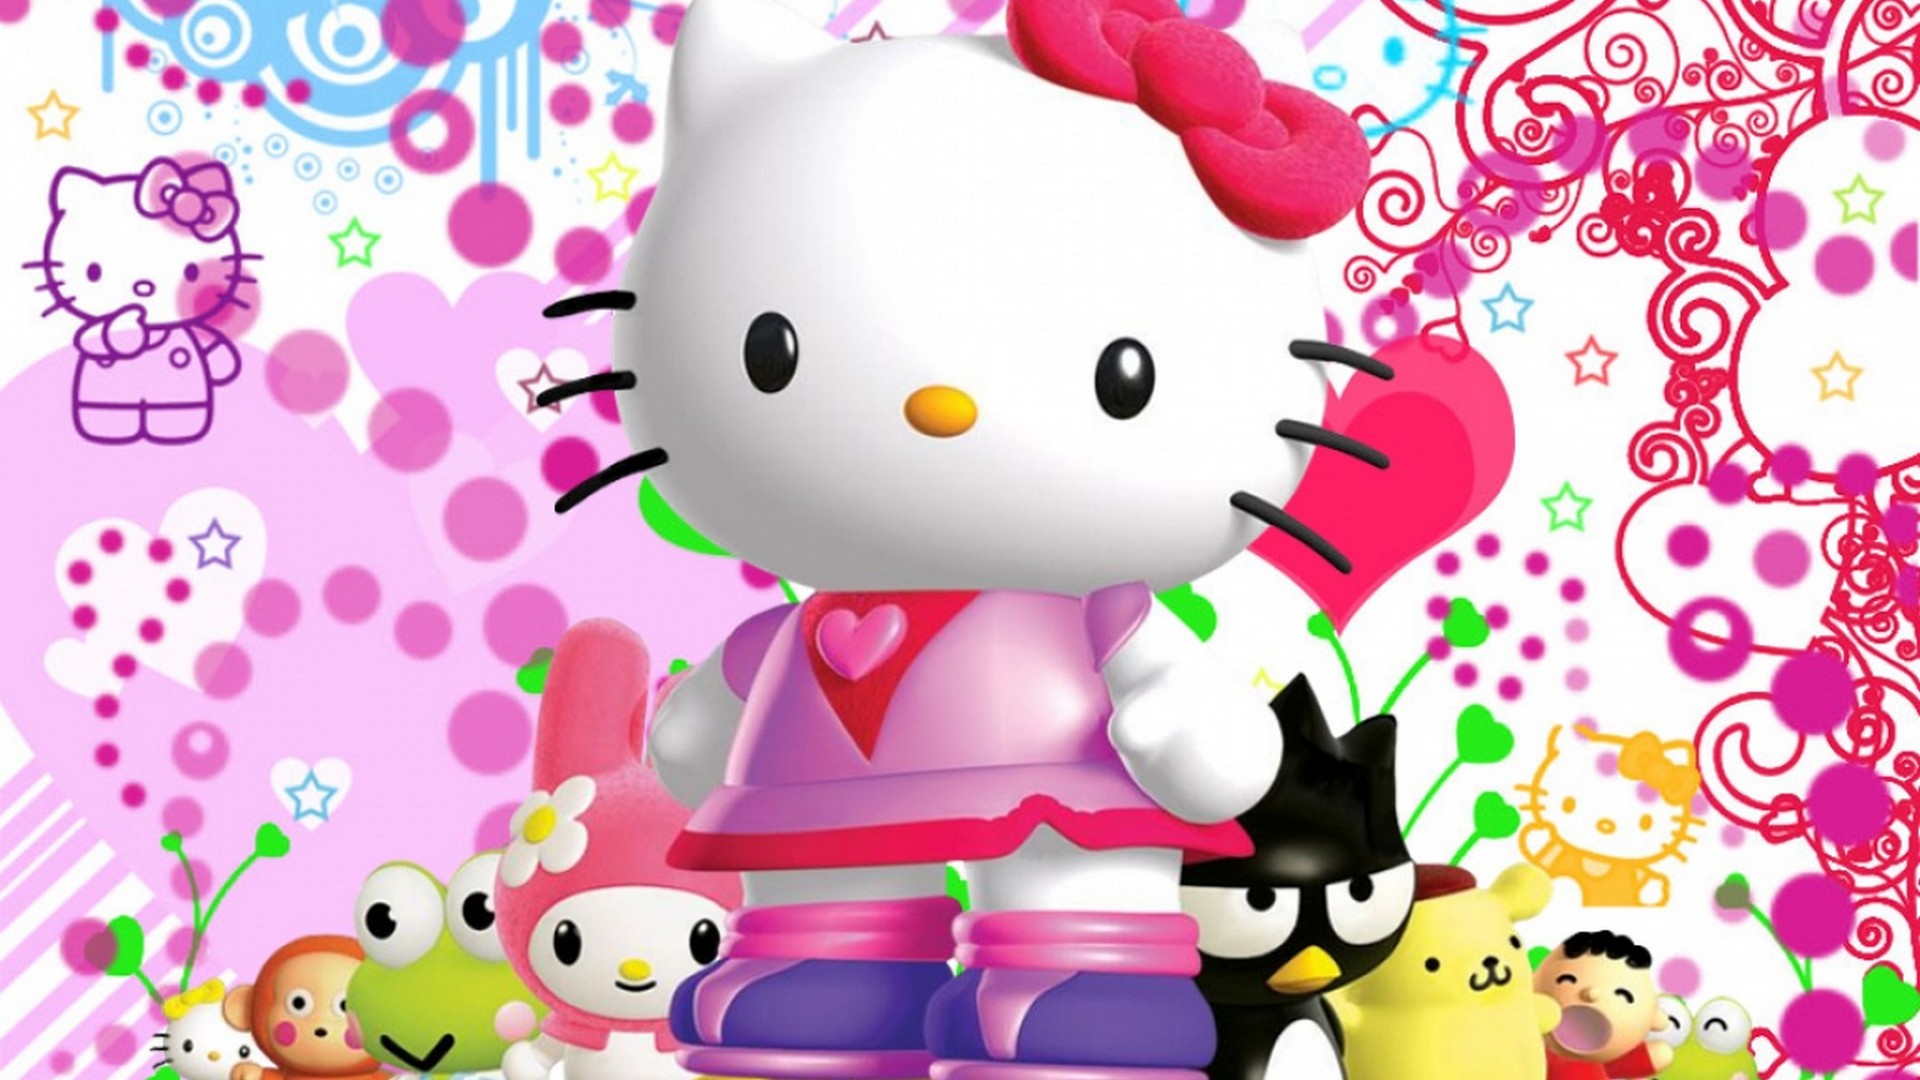 Wallpaper Kitty with resolution 1920X1080 pixel. You can use this wallpaper as background for your desktop Computer Screensavers, Android or iPhone smartphones